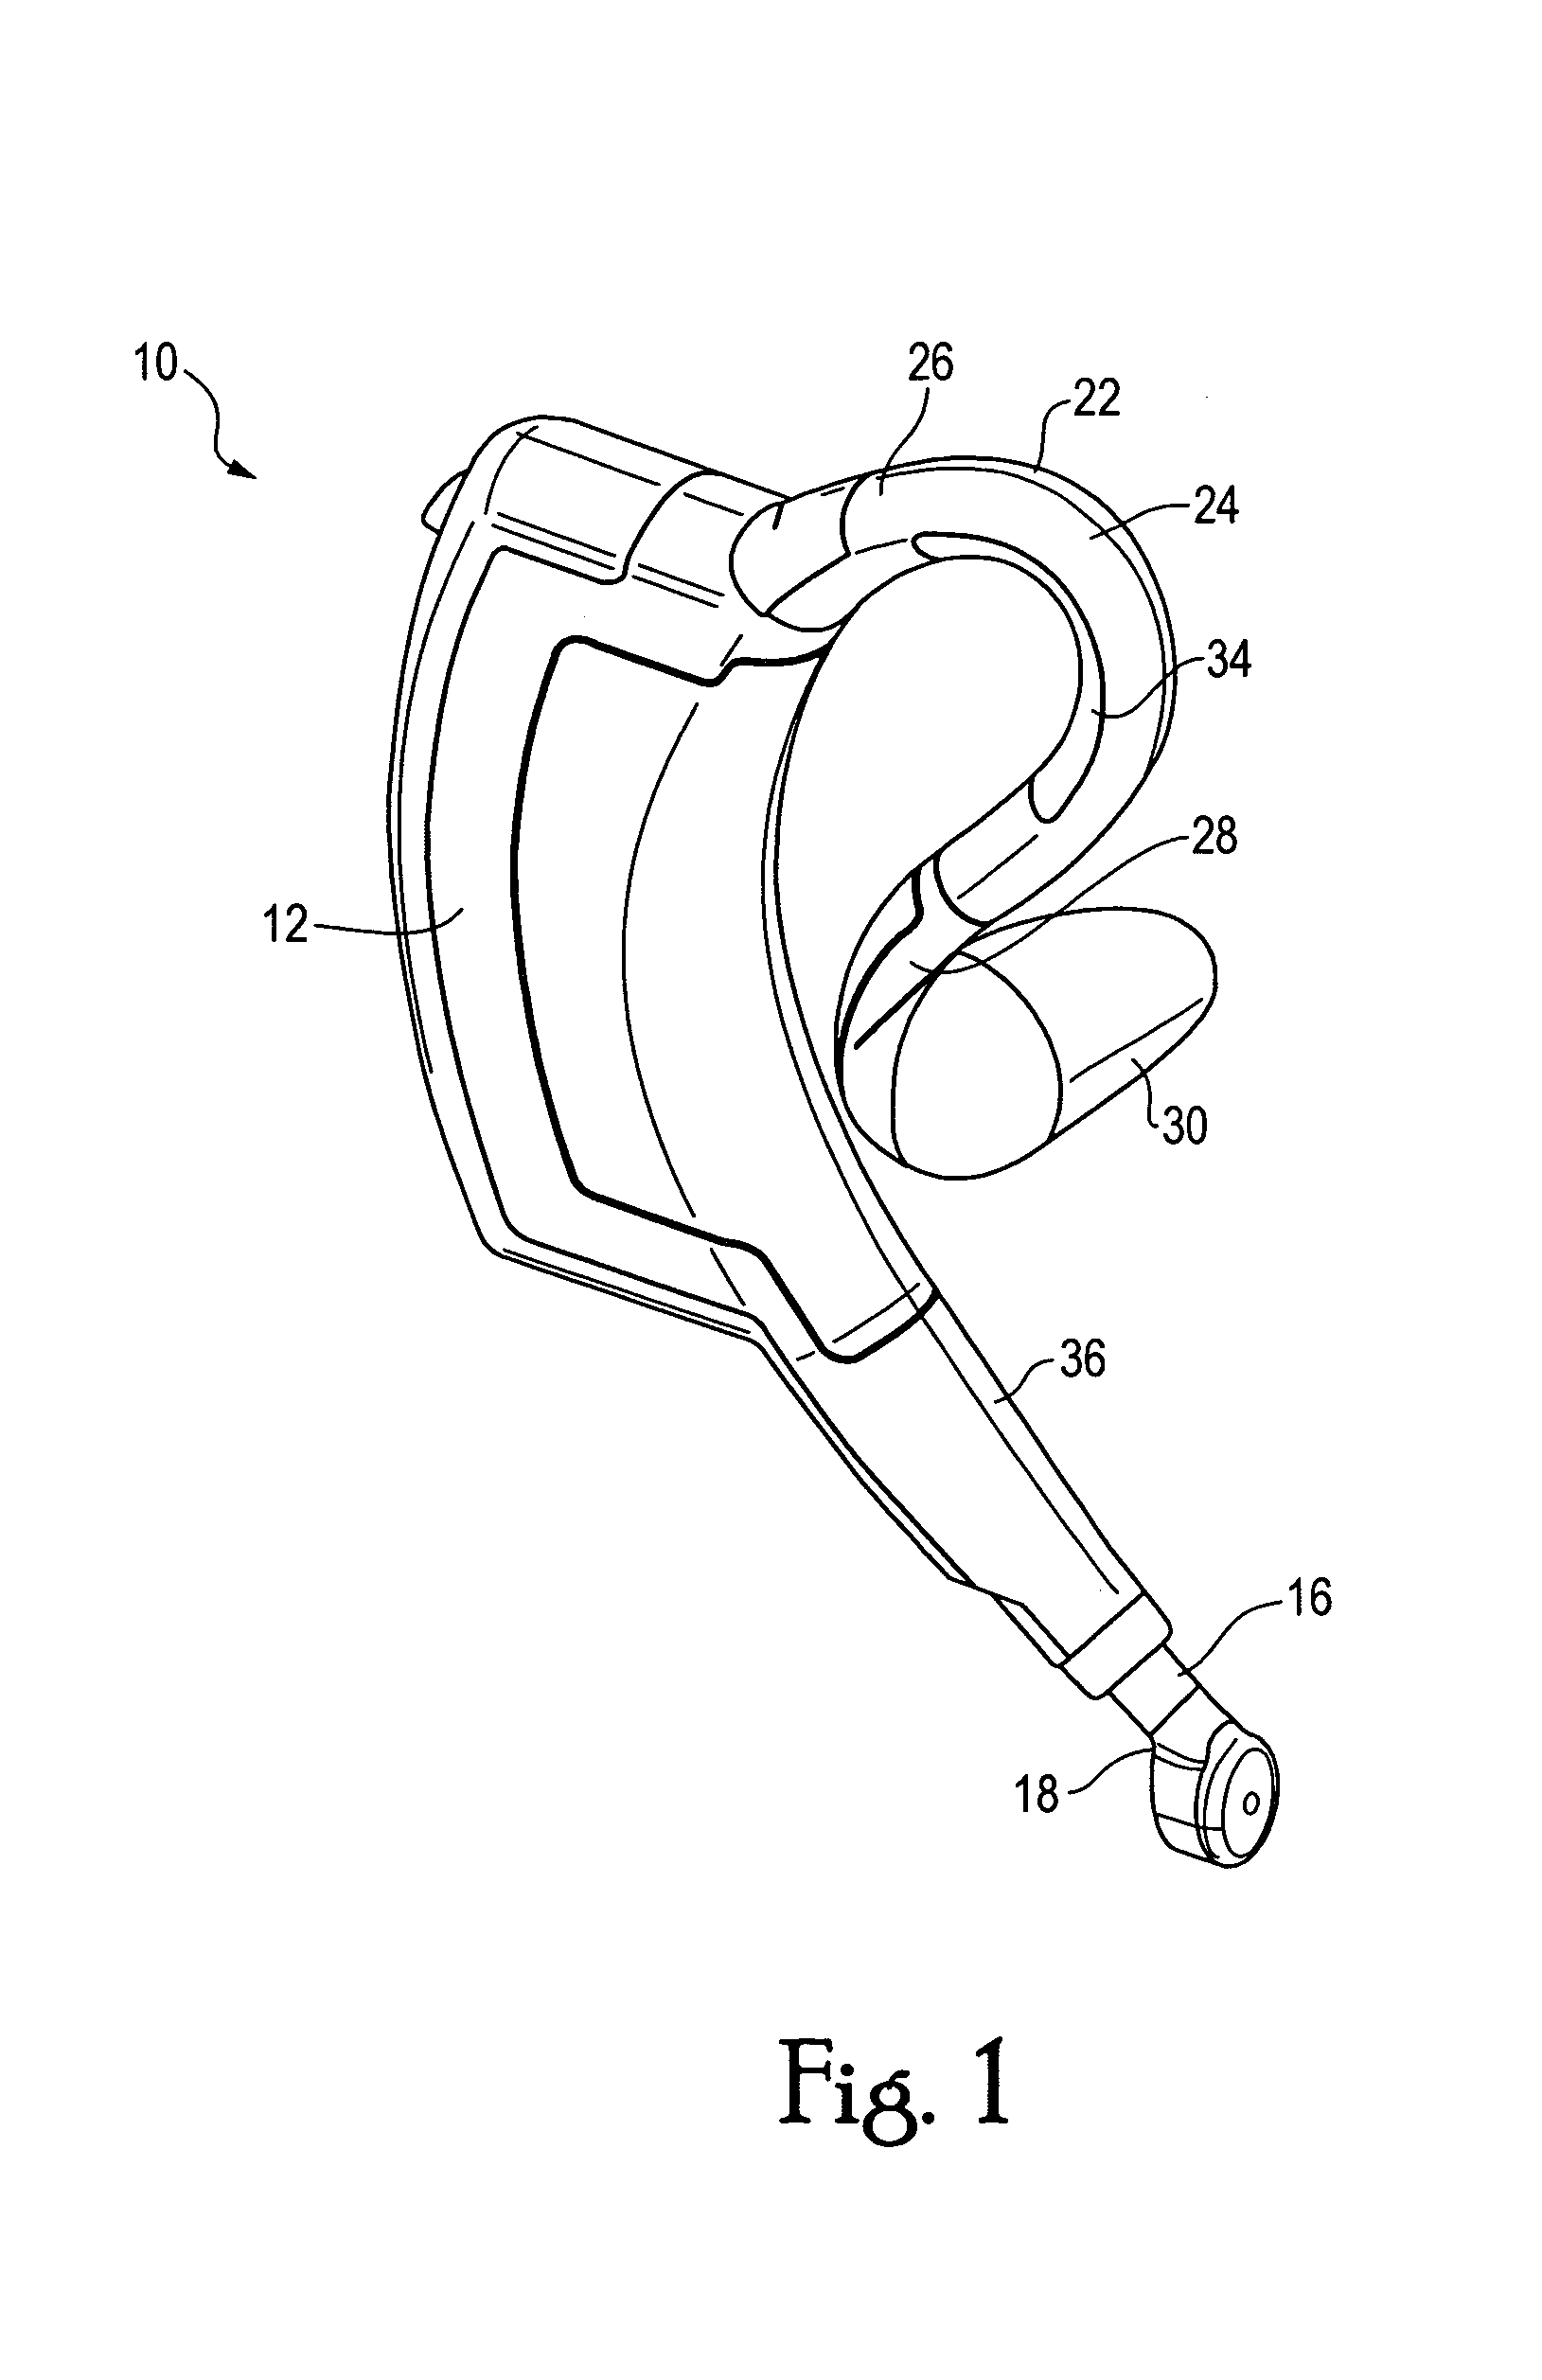 Headset with variable gain based on position of microphone boom